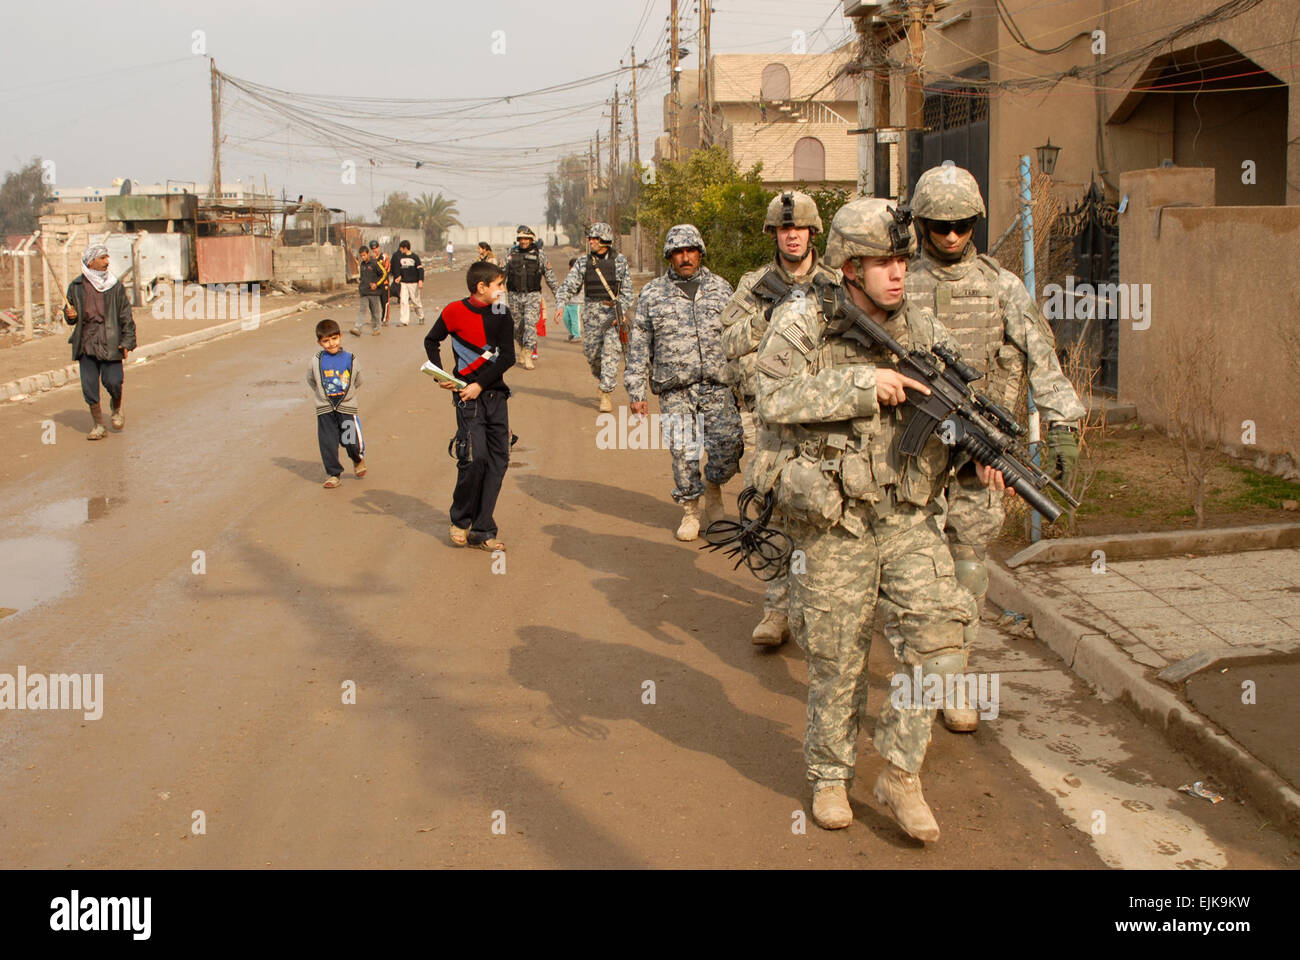 U.S. Army Soldiers clear a neighborhood of any insurgent activity and possible weapon caches in Al Rashid, Baghdad, Iraq, Jan. 28, 2008.  Petty Officer 2nd Class Greg Pierot Stock Photo